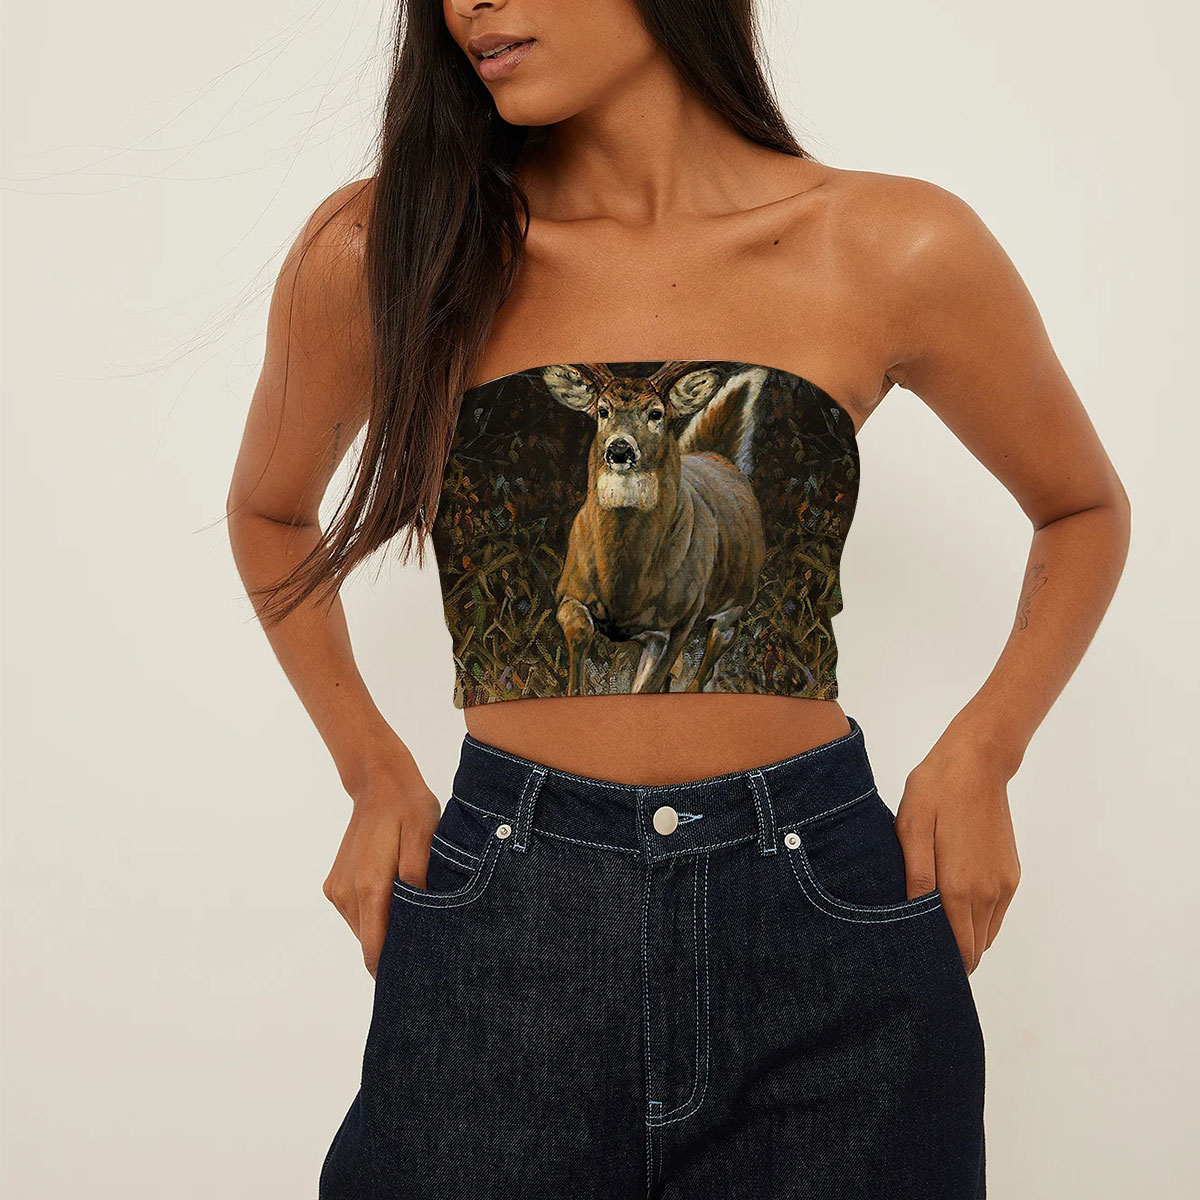 Deer Hunting In The Forest Tube Top_1_2.1